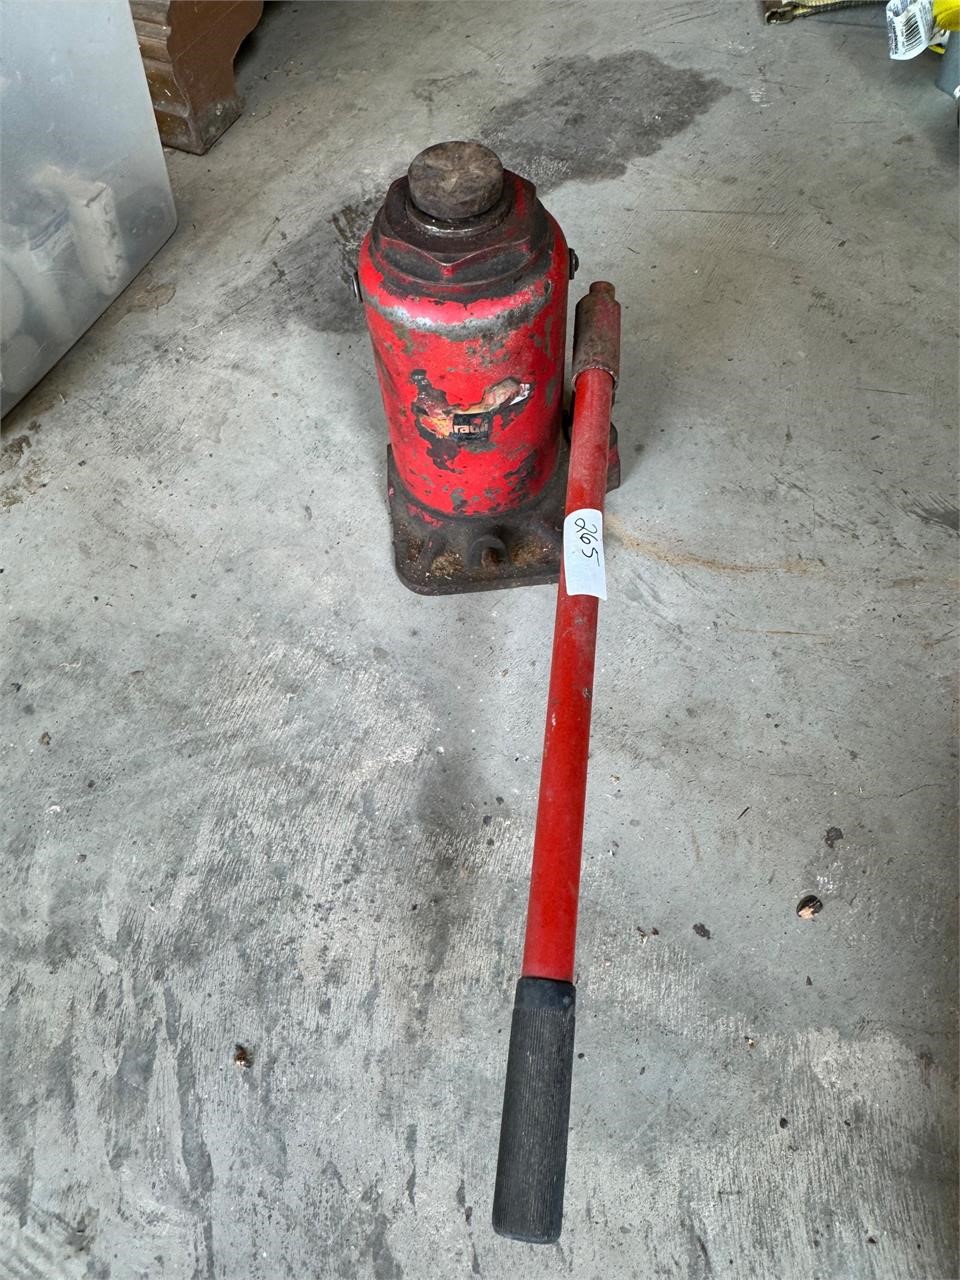 RED HYDROLIC JACK WITH HANDLE